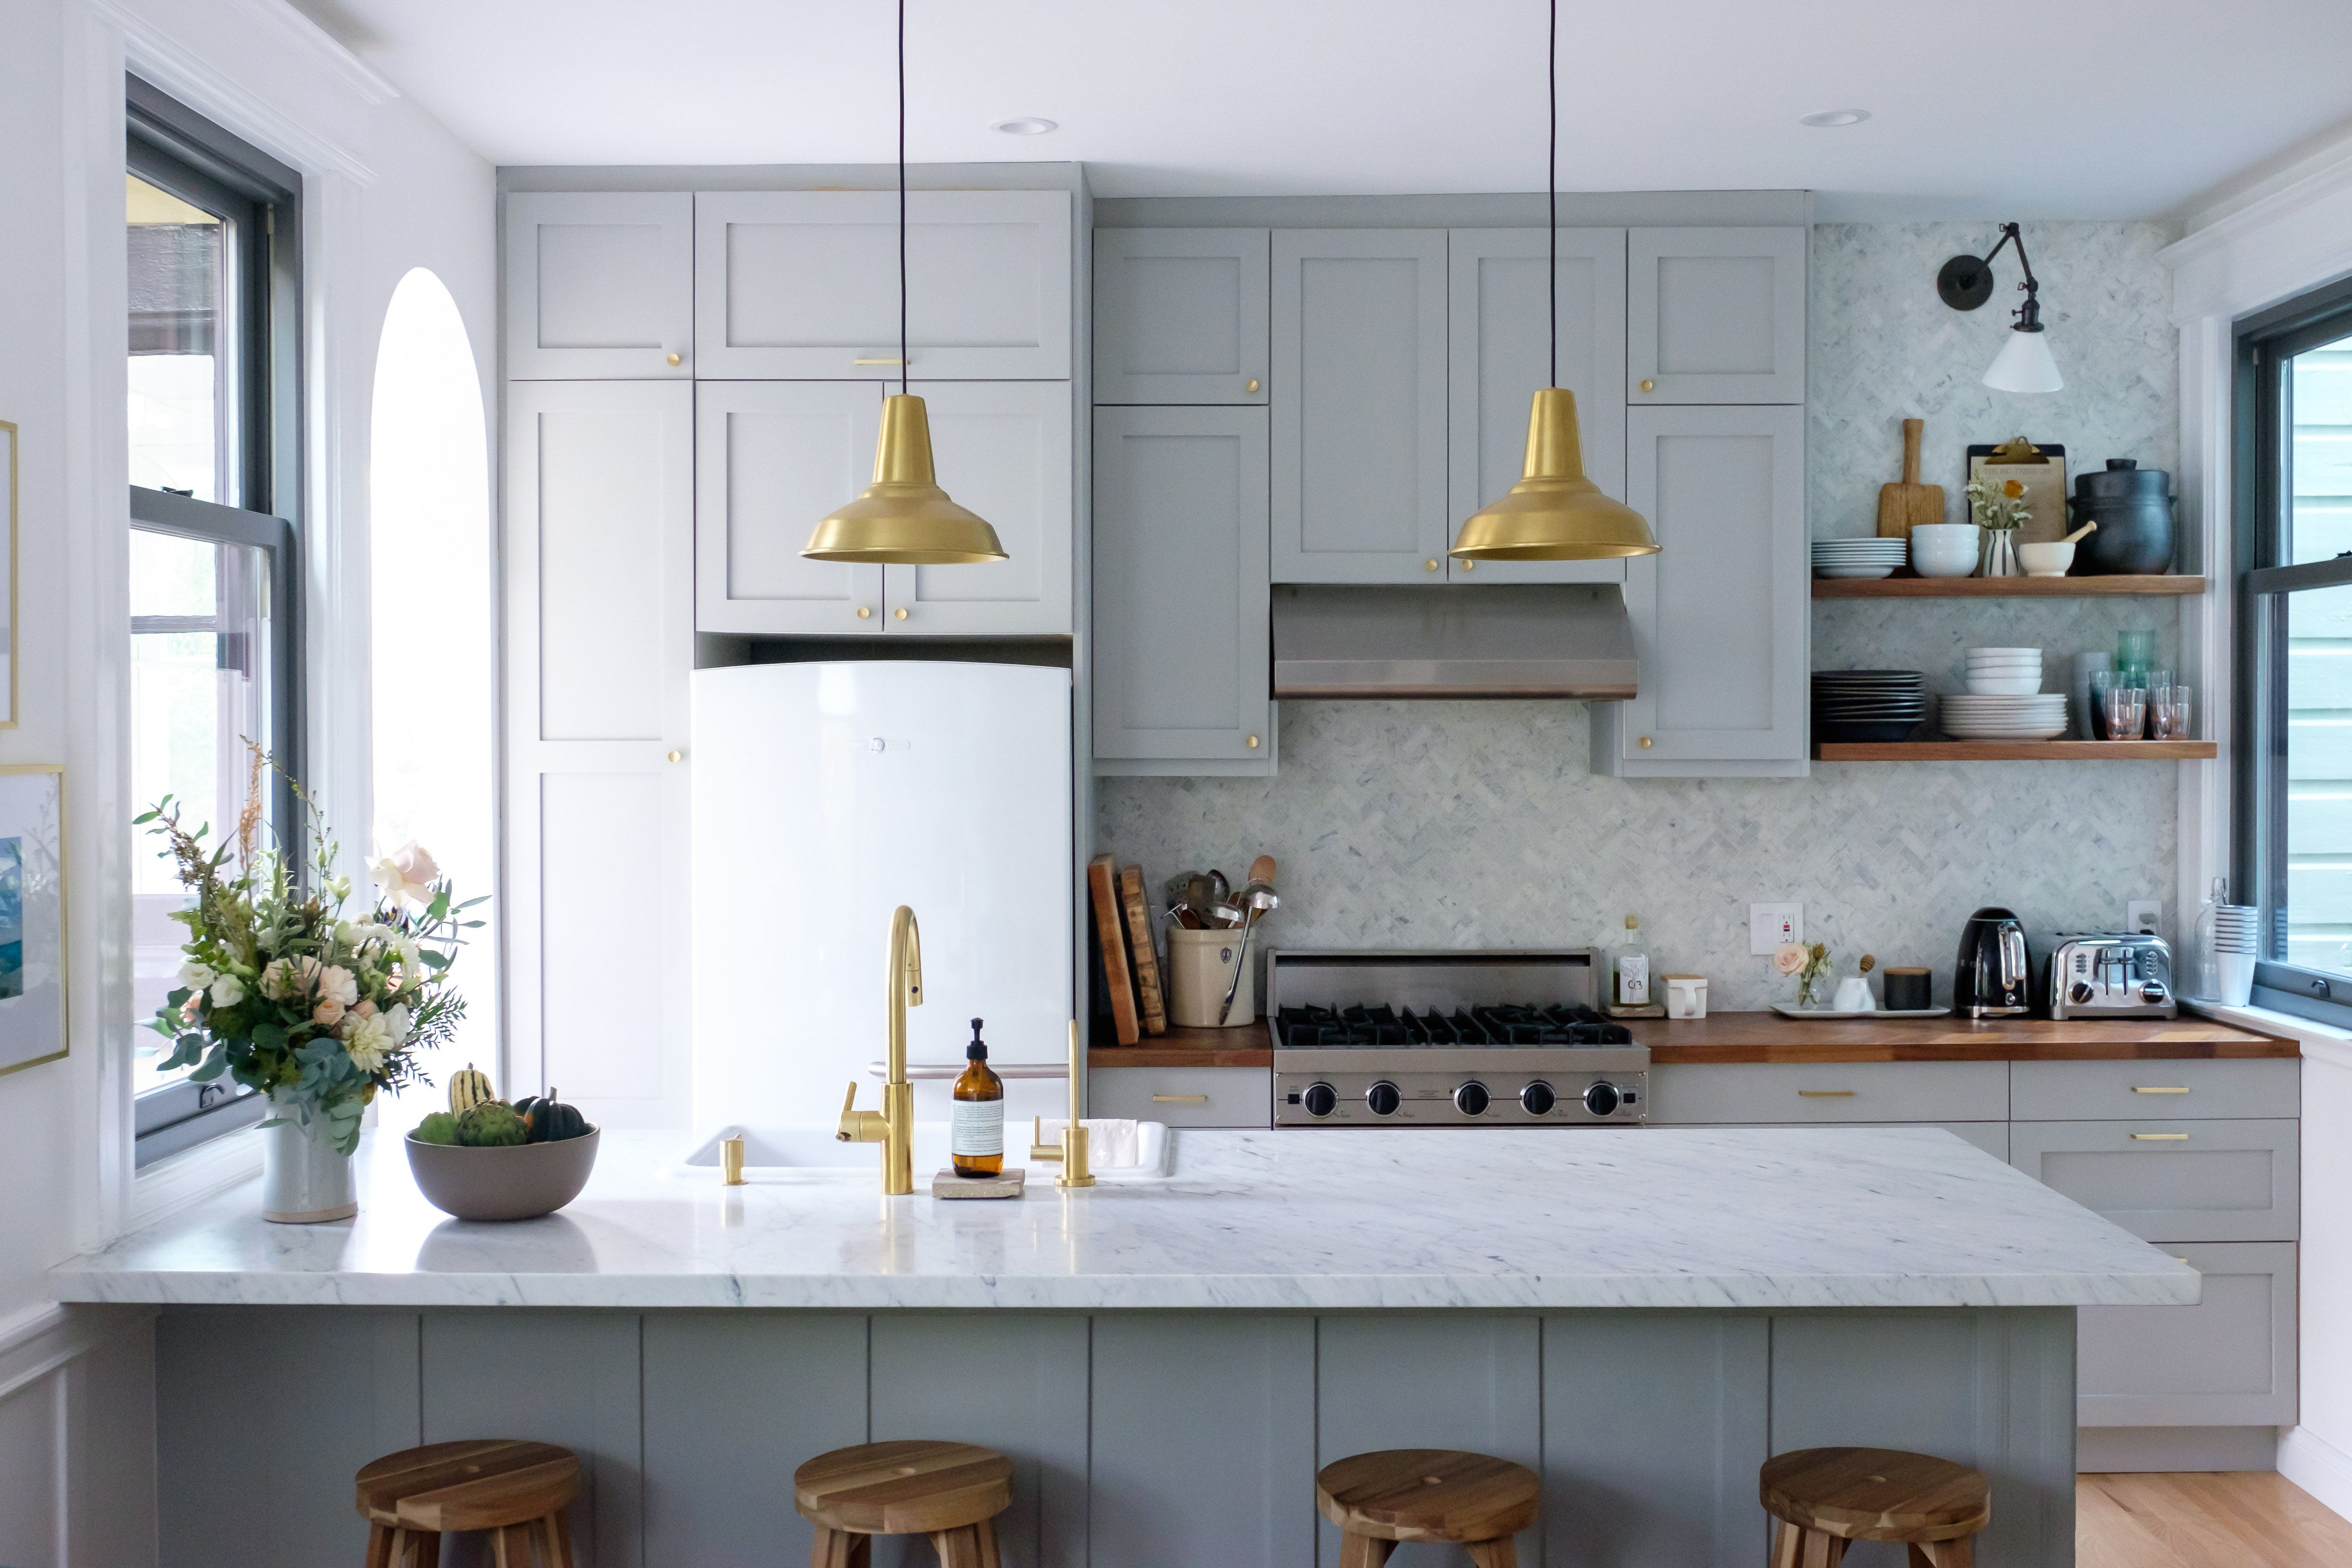 Why IKEA Kitchens Are So Popular   18 Reasons Designers Love Ikea ...